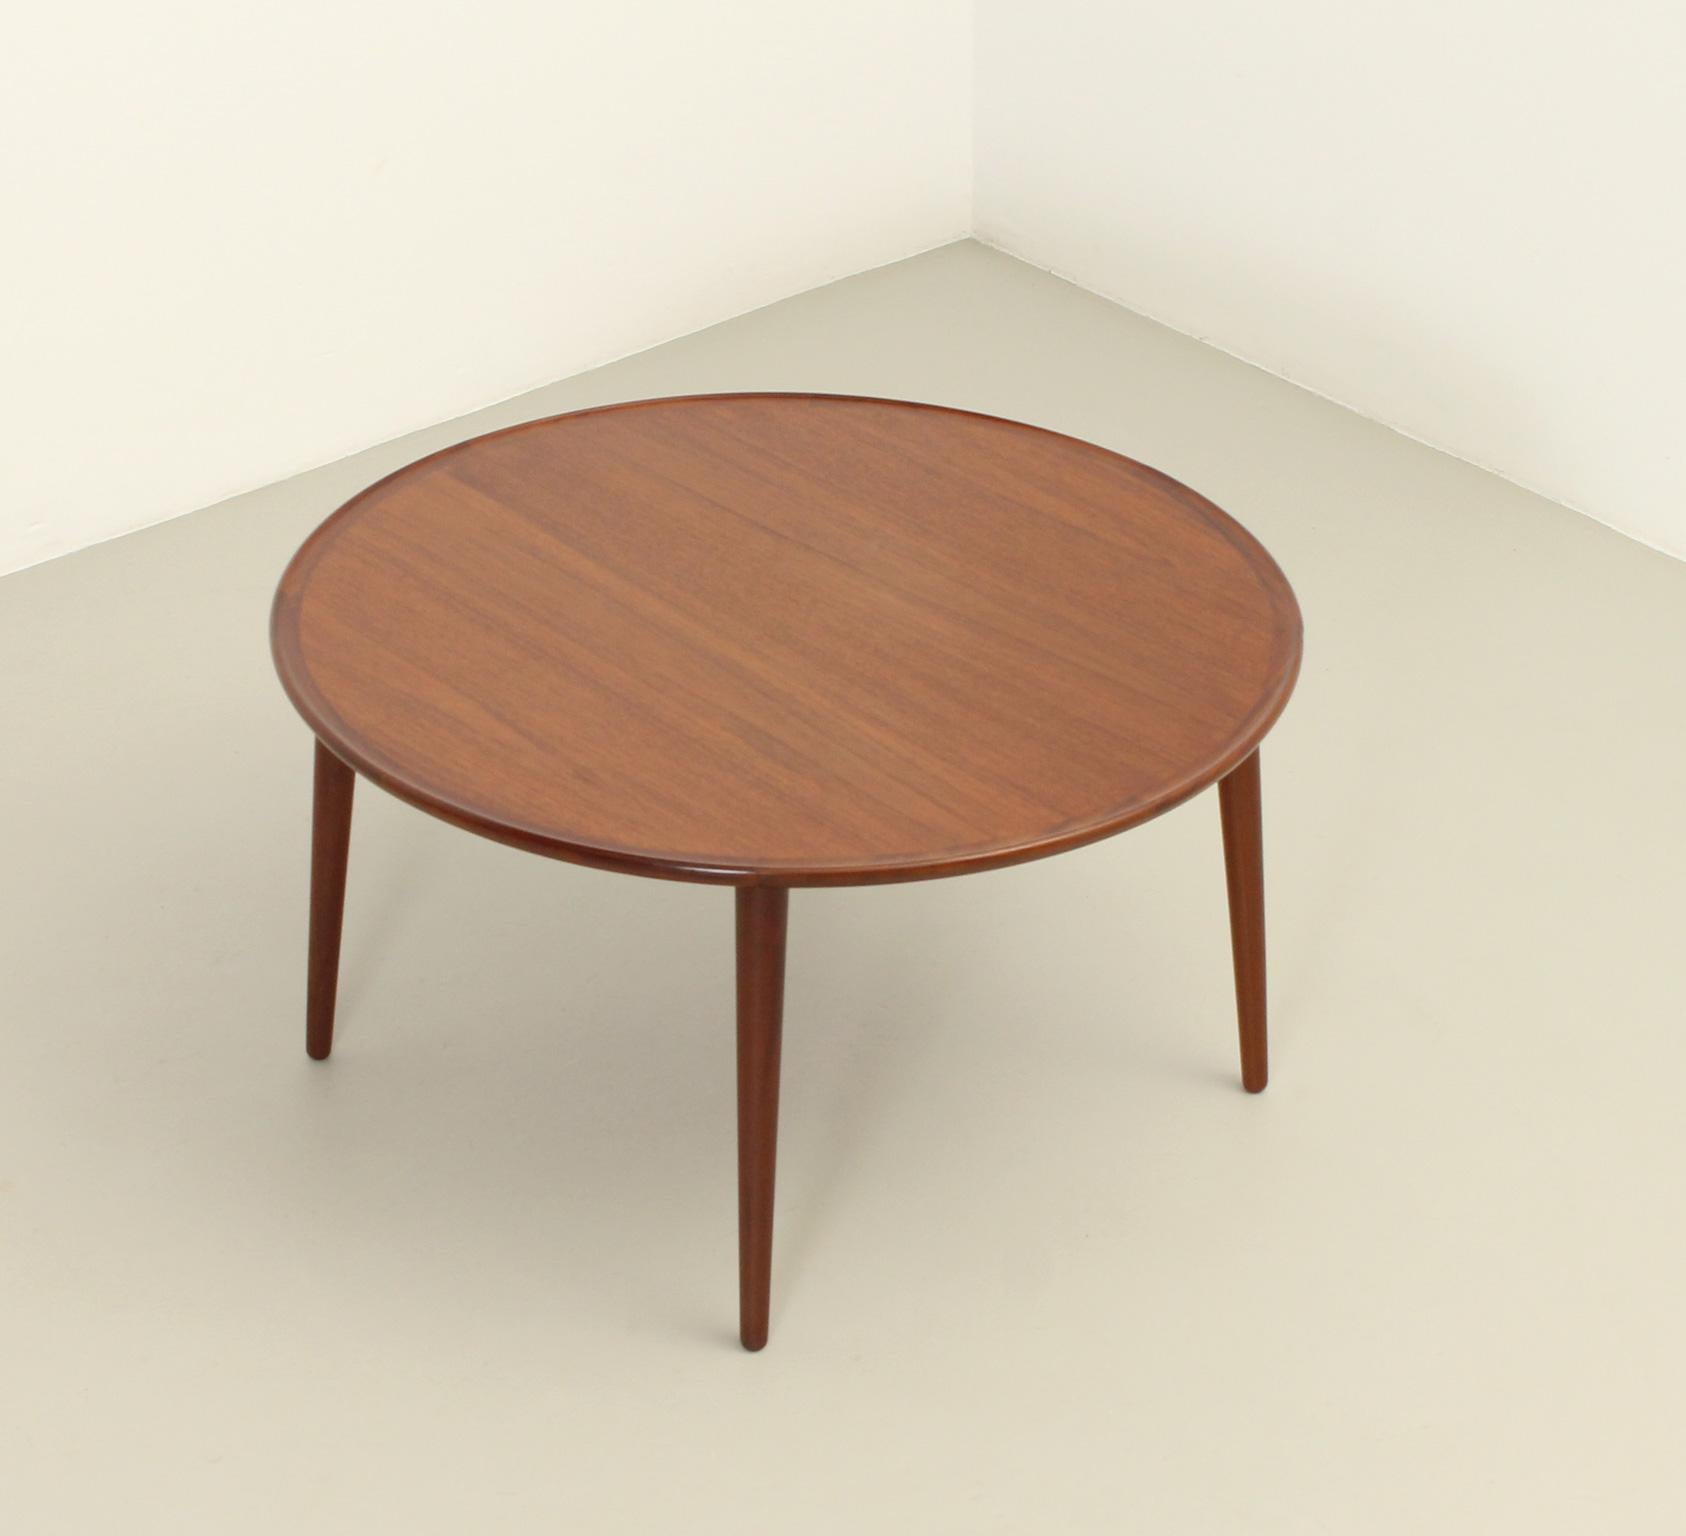 Round teak coffee table by BC Møbler, Denmark, 1960's. Solid teak wood with nice detailed edge, removable legs for an easy transport.